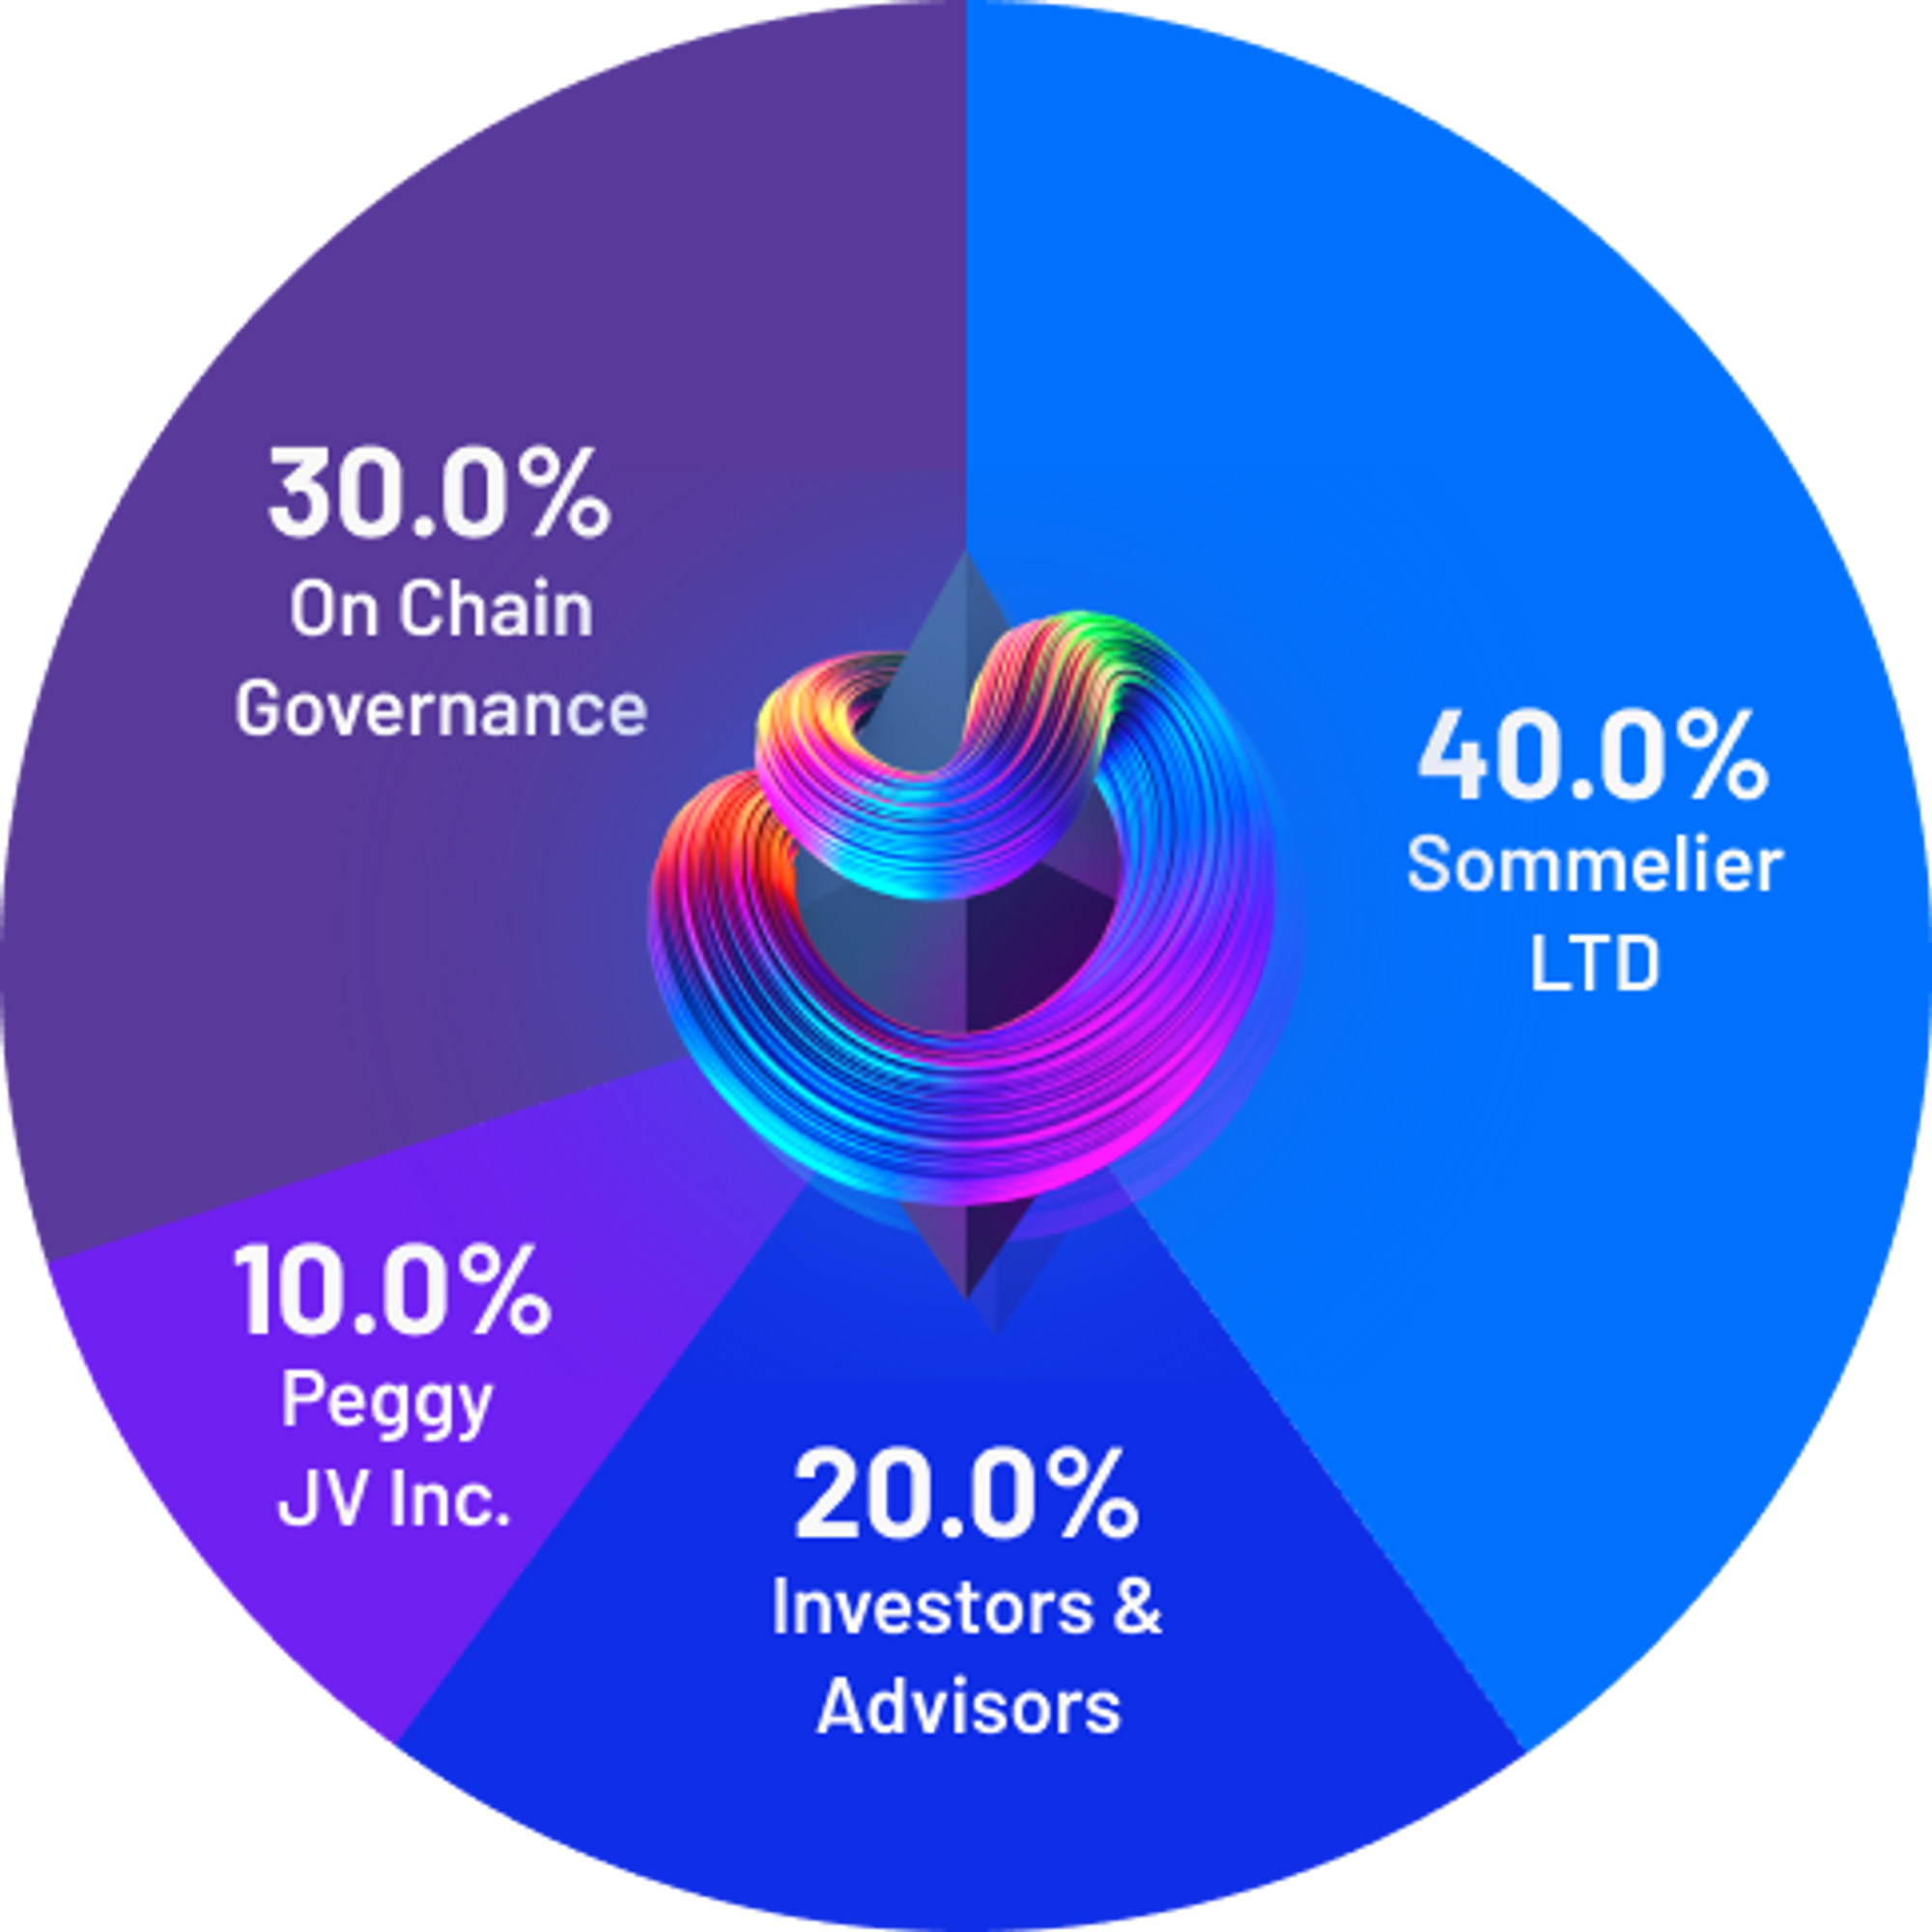 $SOMM token distribution infographic (https://tricky-sand-5e6.notion.site/Introduction-to-Sommelier-91eff2b4ae014009879c7e141d47ac6d)